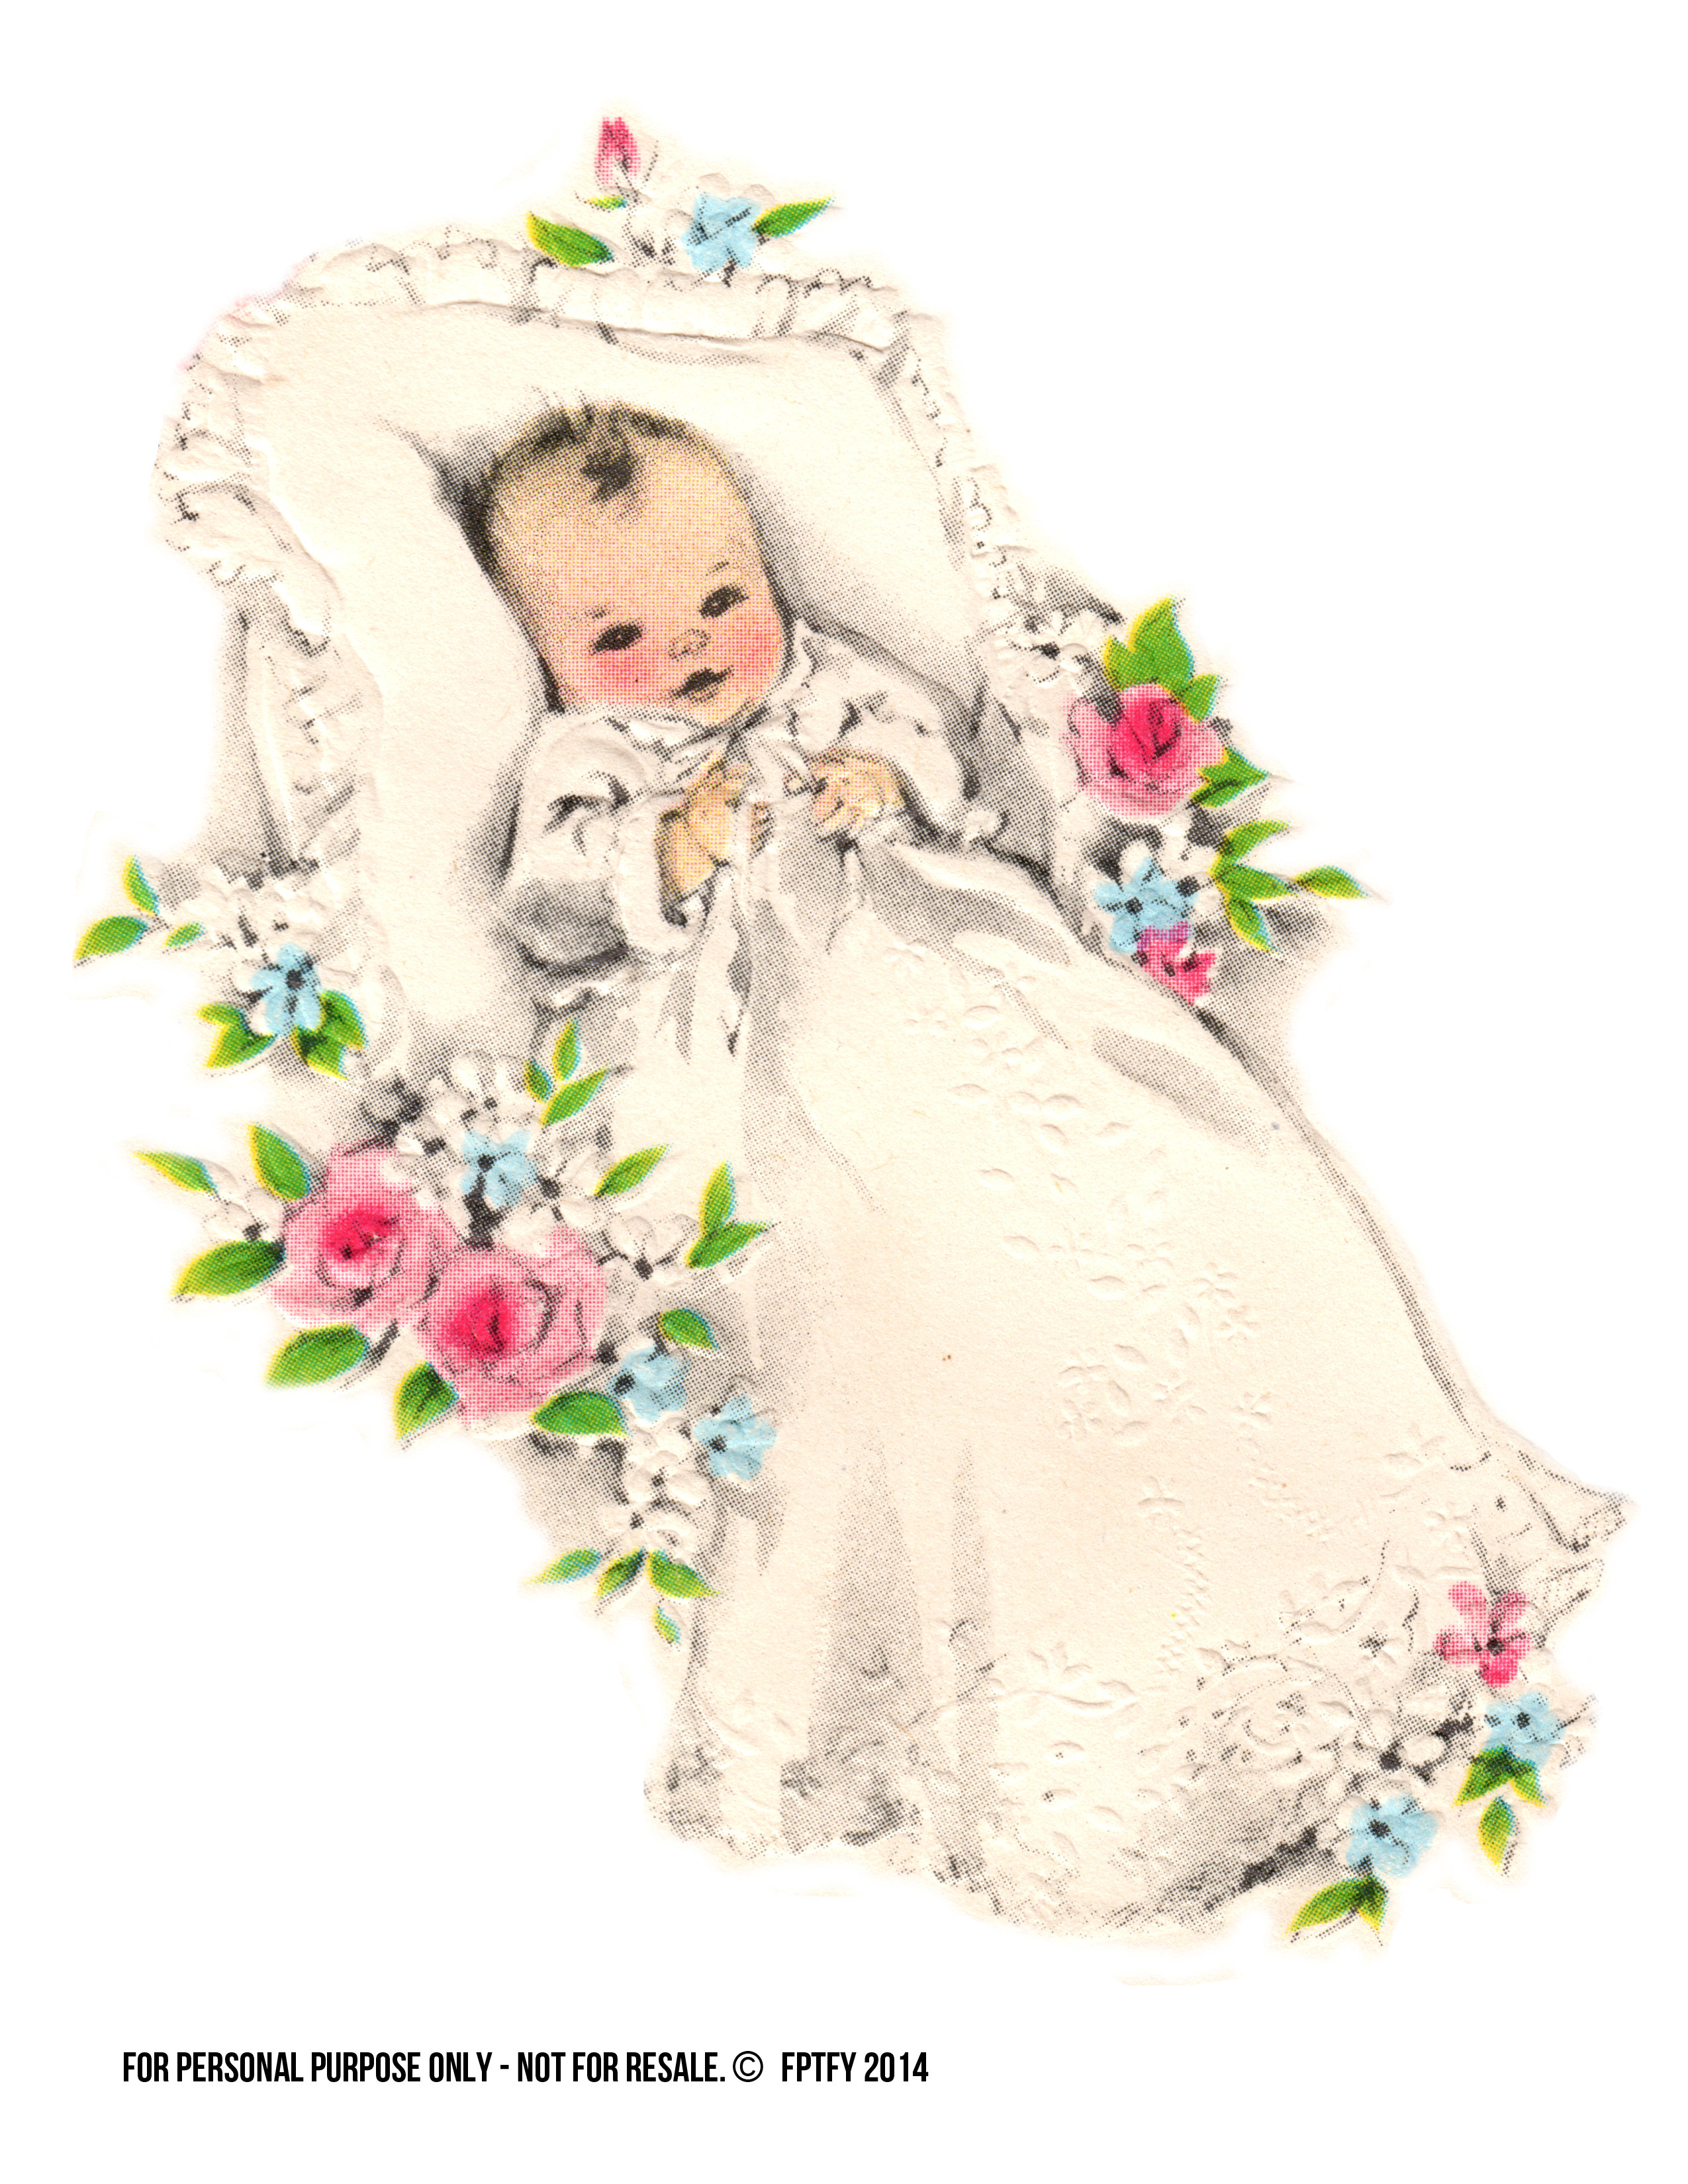 ... free-vintage-baby-clipart - Free Baby Clipart Images